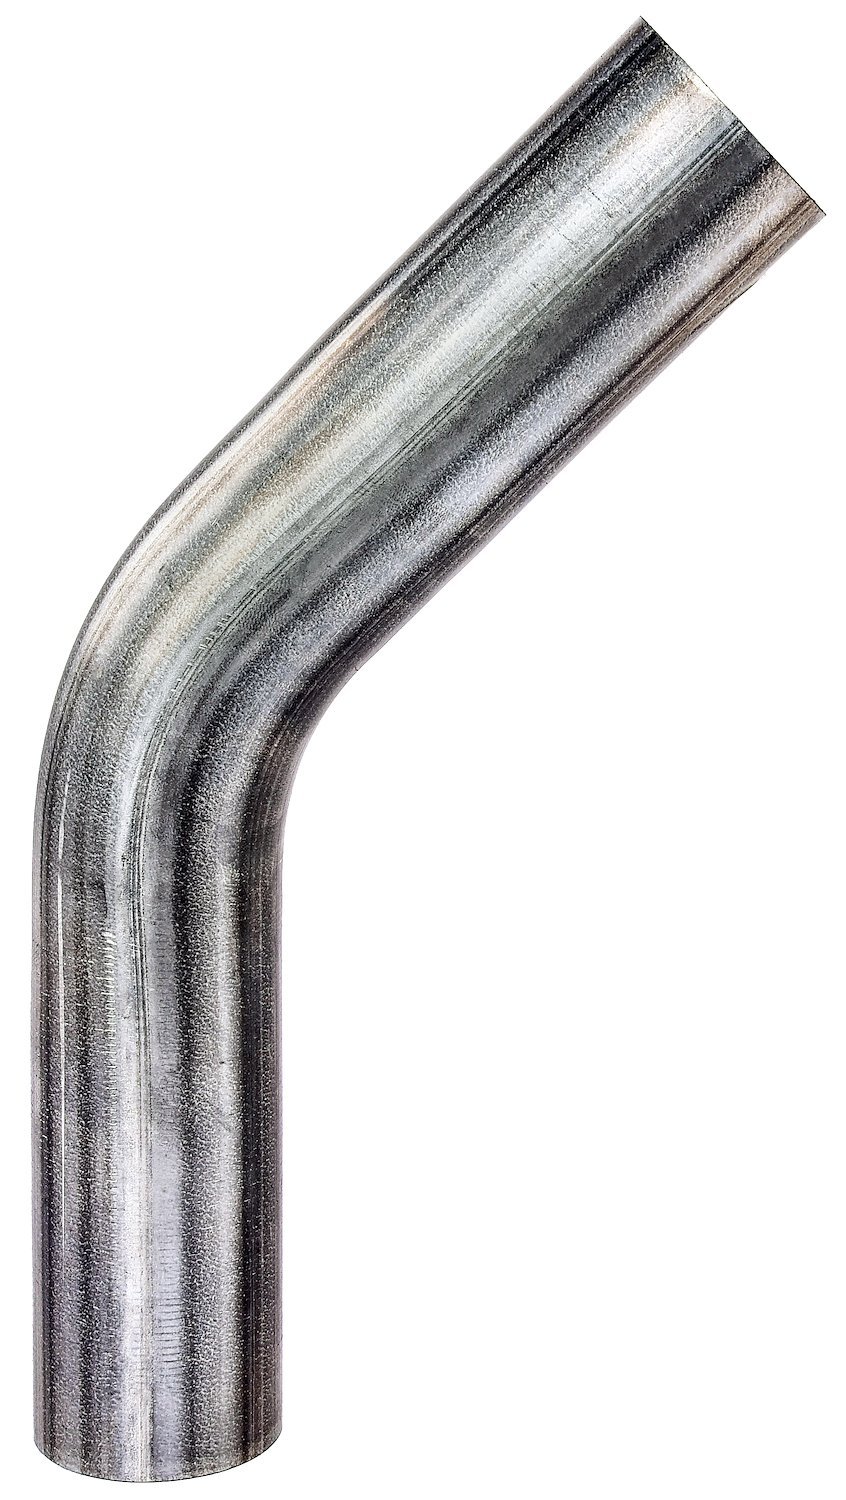 Exhaust Elbow Aluminized Steel [45-Degree Bend, 2.500 in. Outer Diameter]